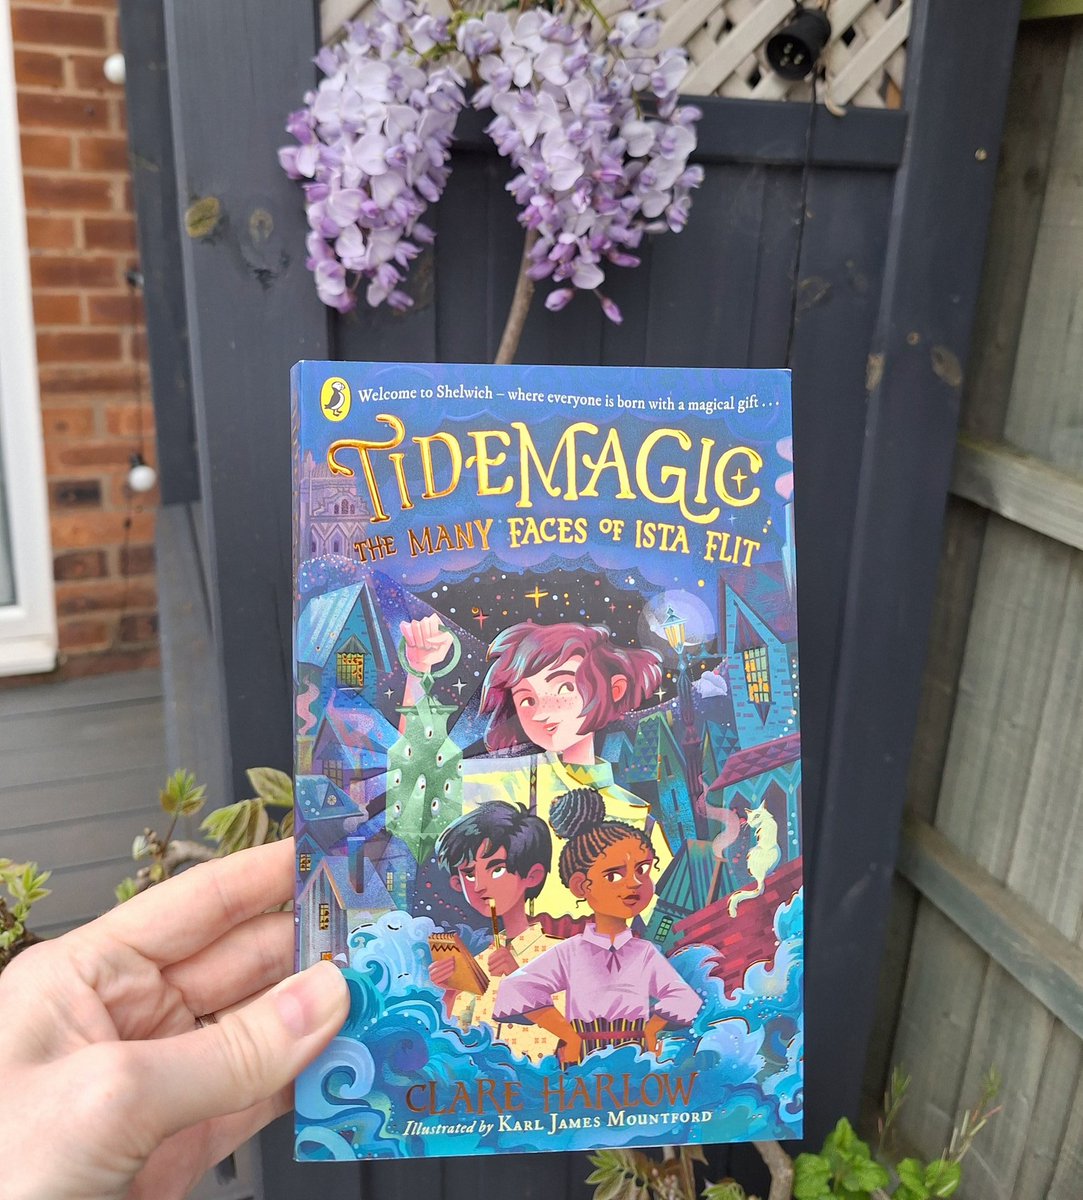 Currently reading Tidemagic - The Many Faces of Ista Flit by @clareharlow and loving it! 😍 (and in other news my wisteria flowered for the first time in 5 years) 🪻